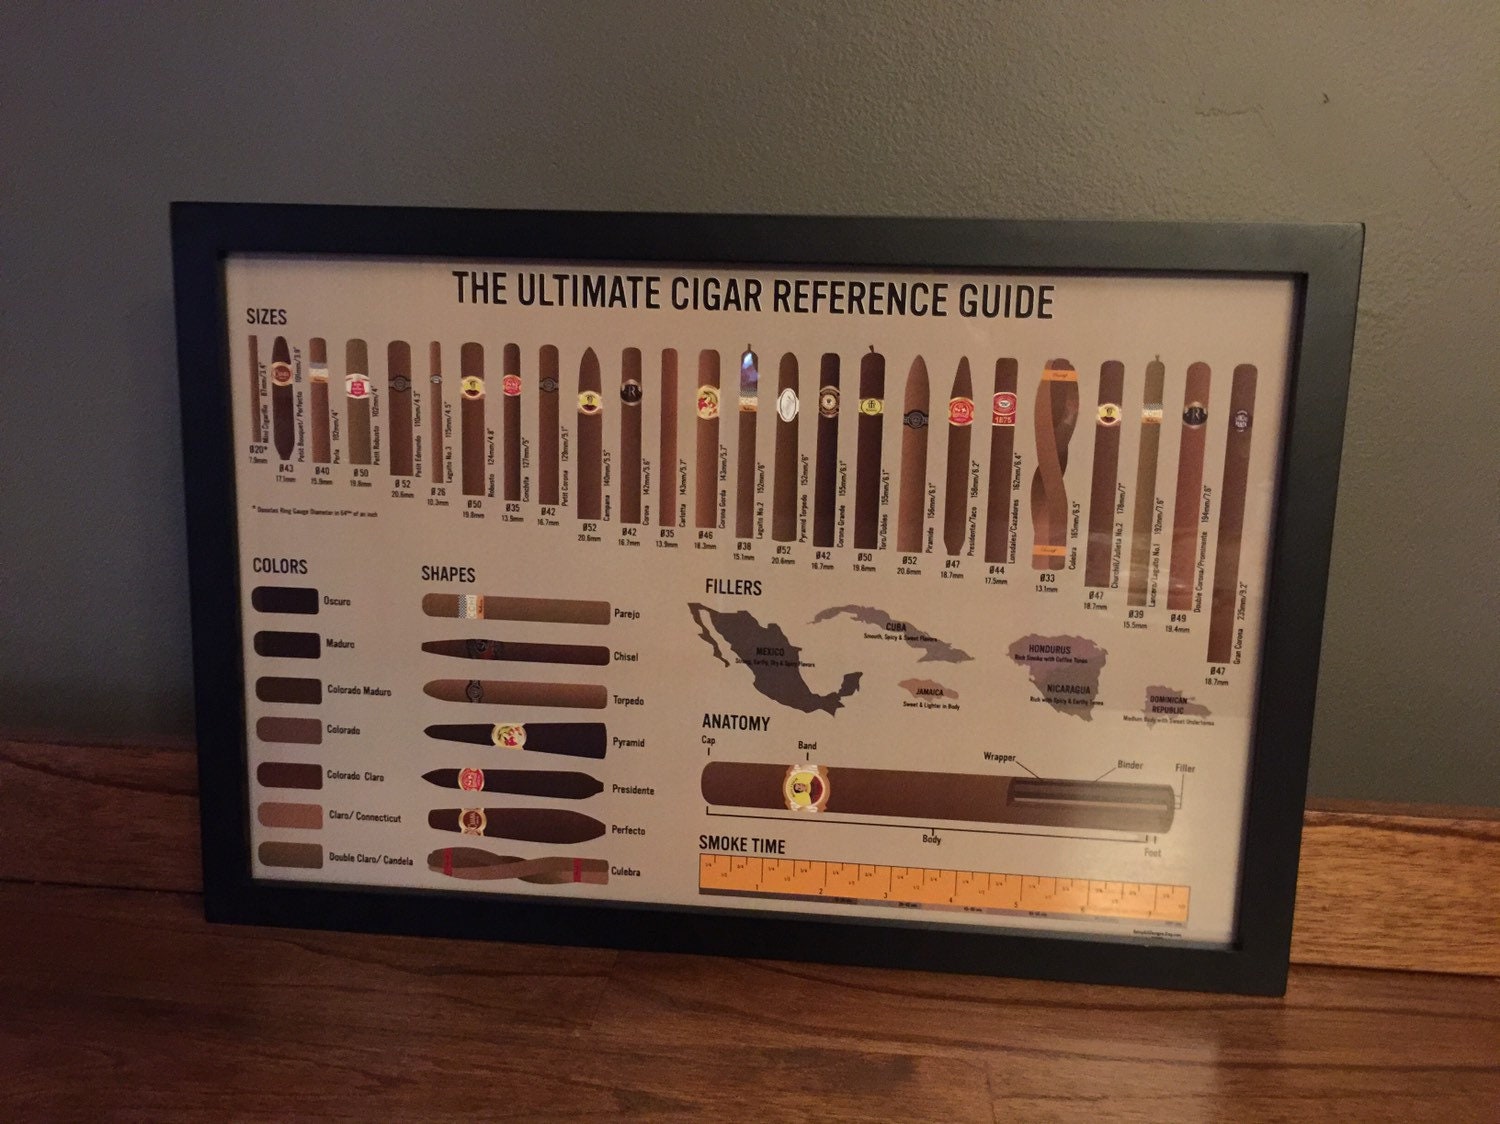 The Ultimate Cigar Reference Guide